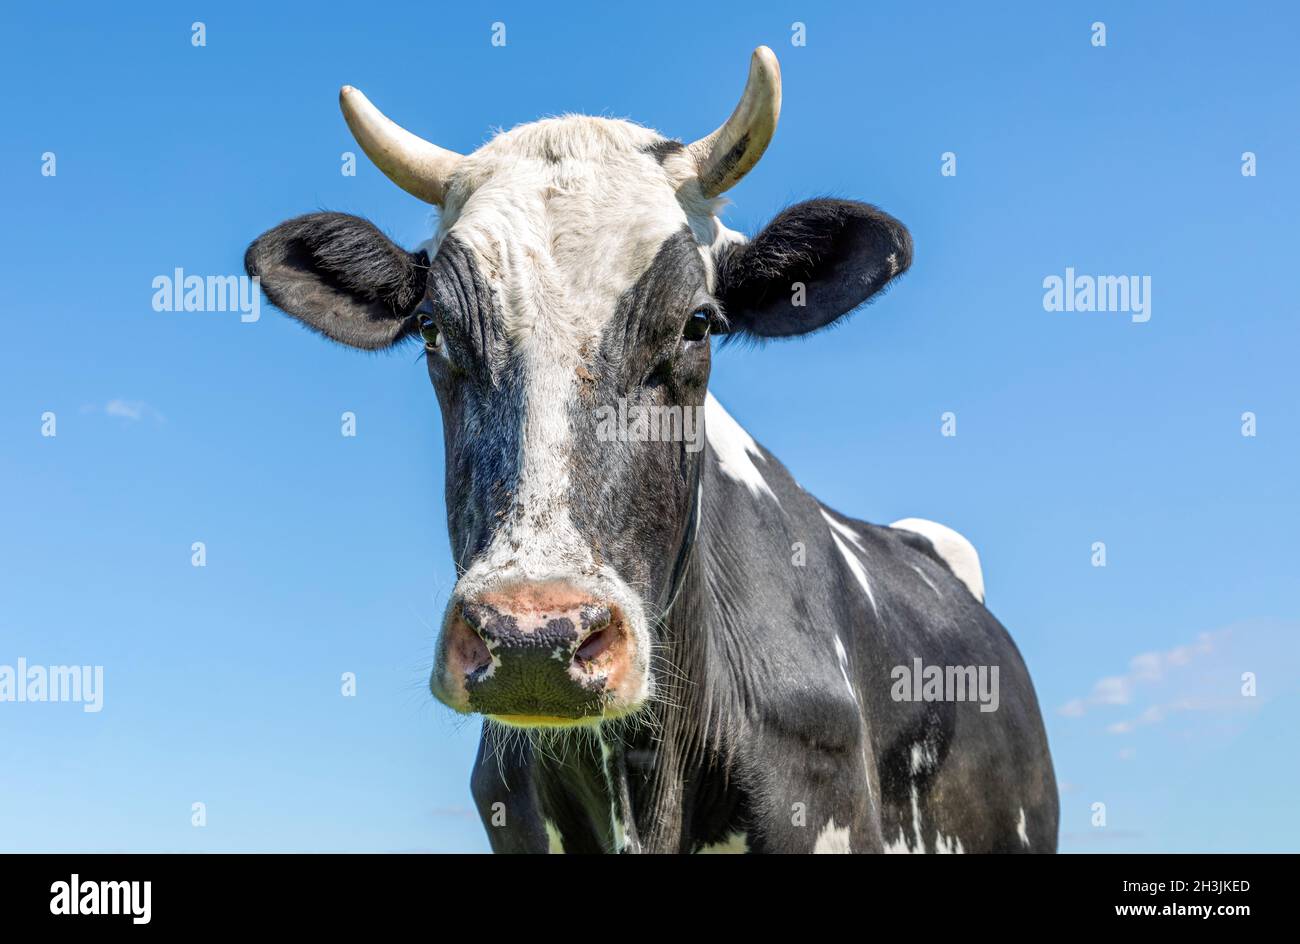 Black And White Cow With Horns Hi-Res Stock Photography And Images - Alamy